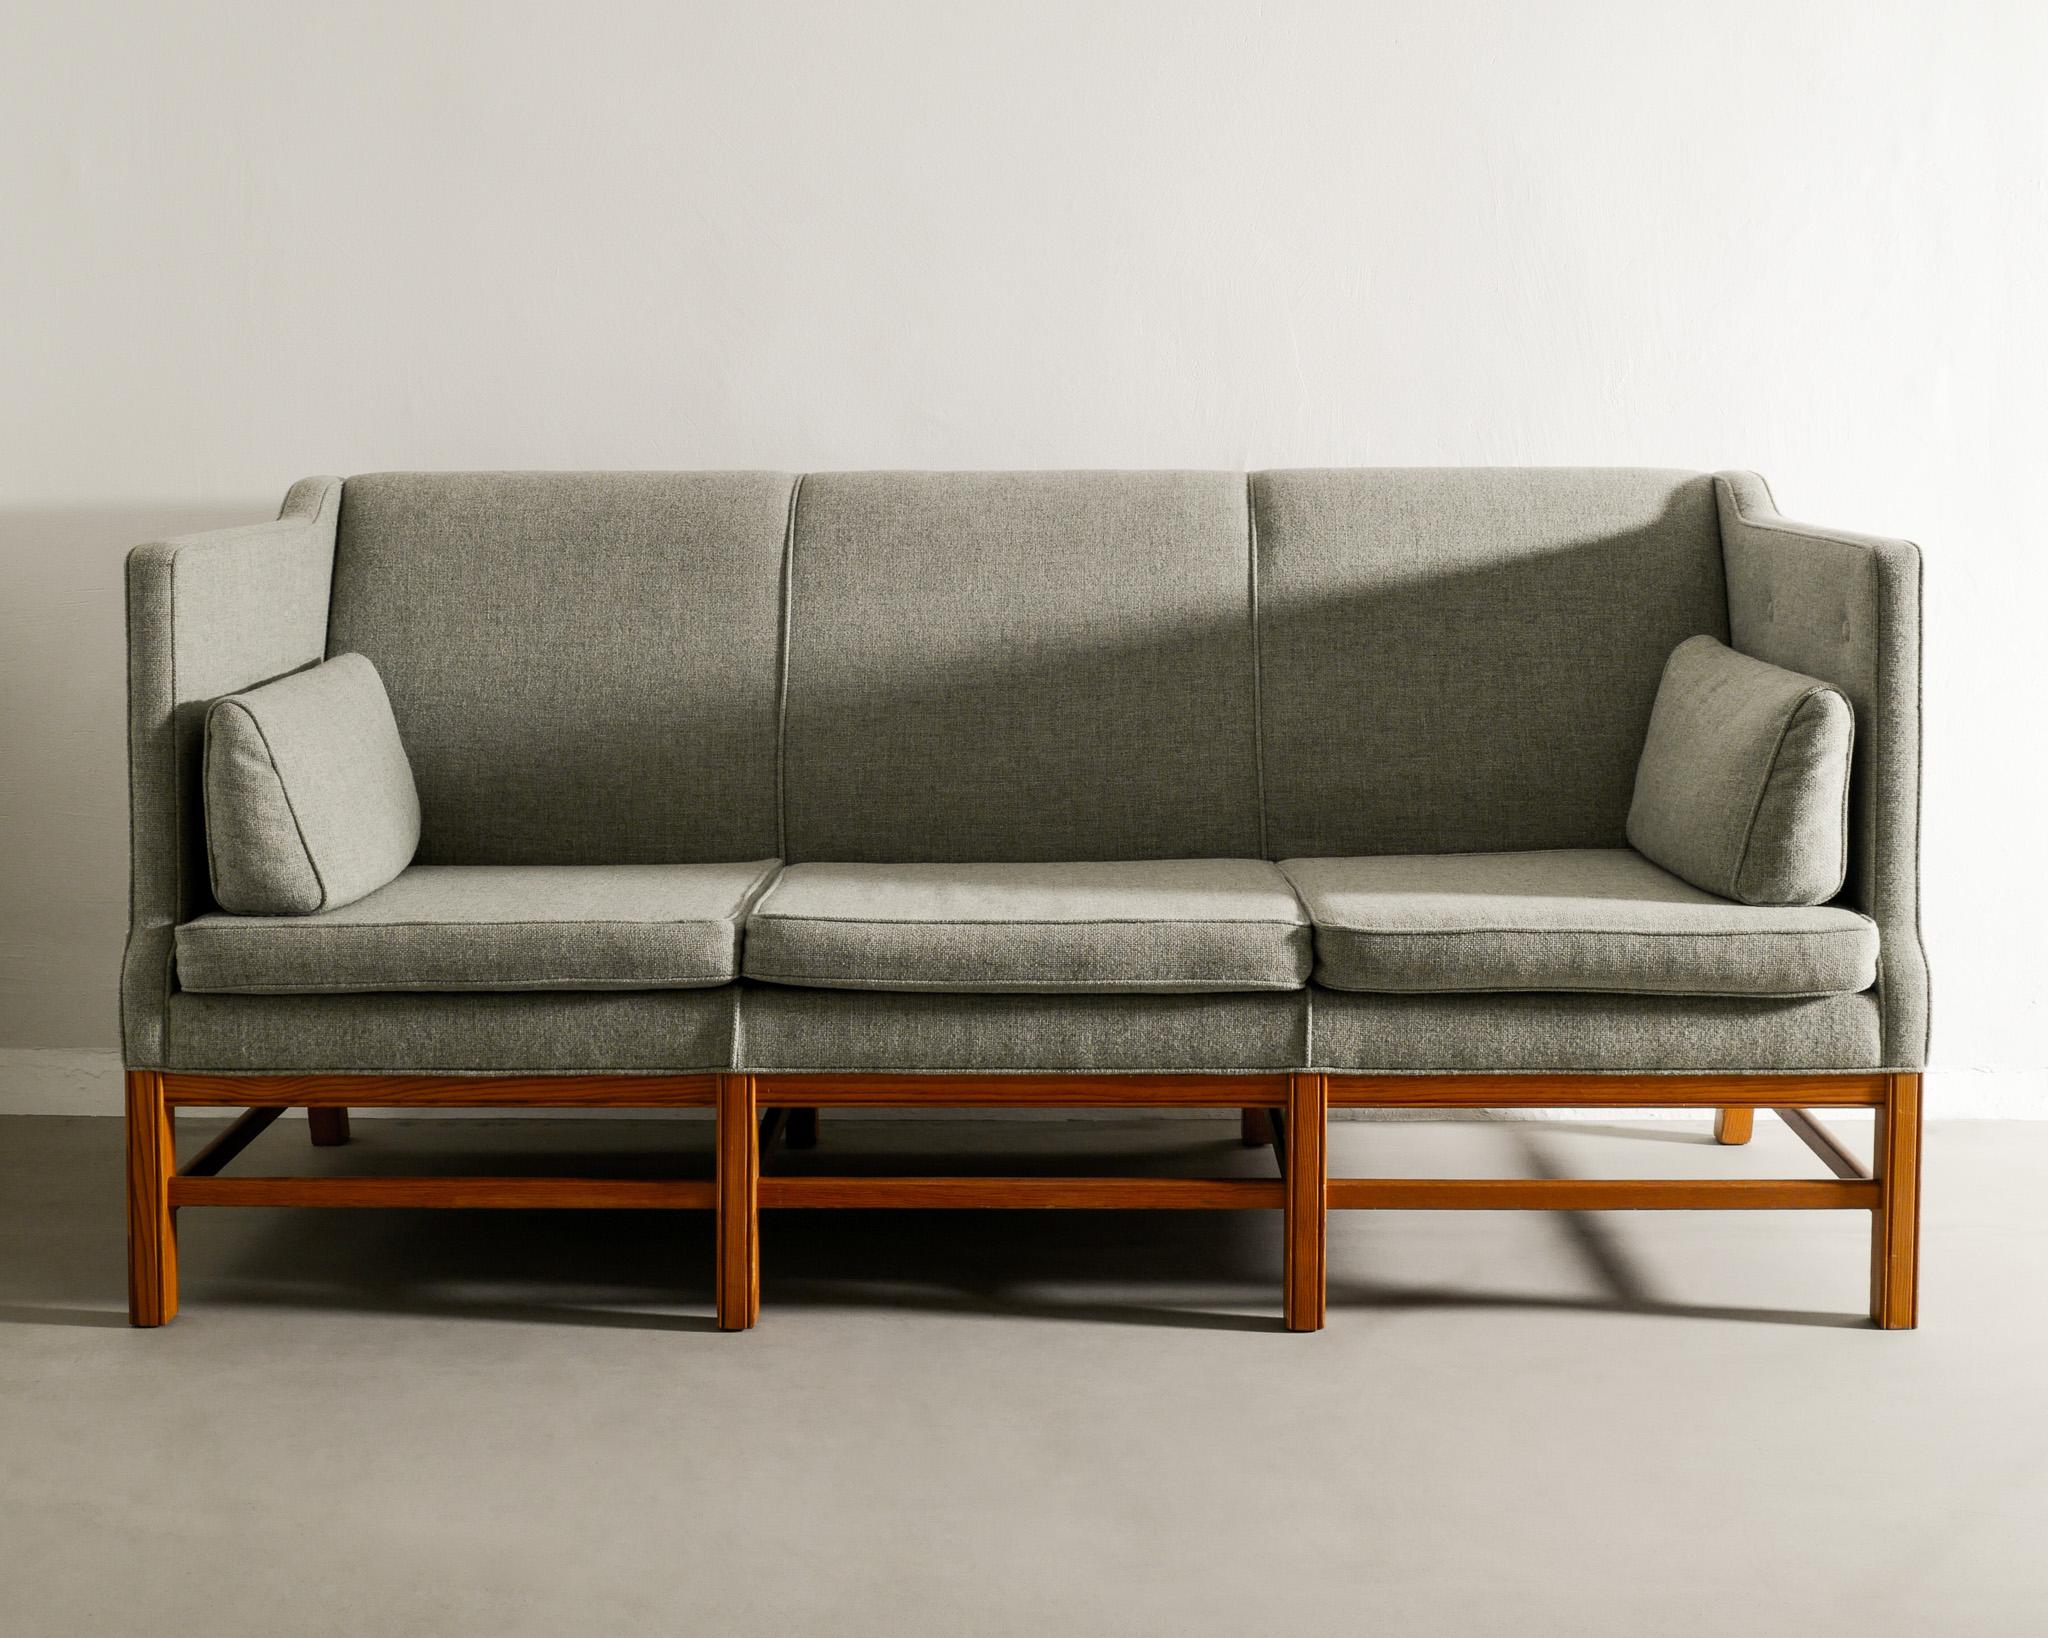 Rare mid century three seater pine sofa in style of Kaare Klint produced in Denmark, 1960s. In great condition newly upholstered in light green wool fabric. 

Dimensions: H: 89 cm / 35